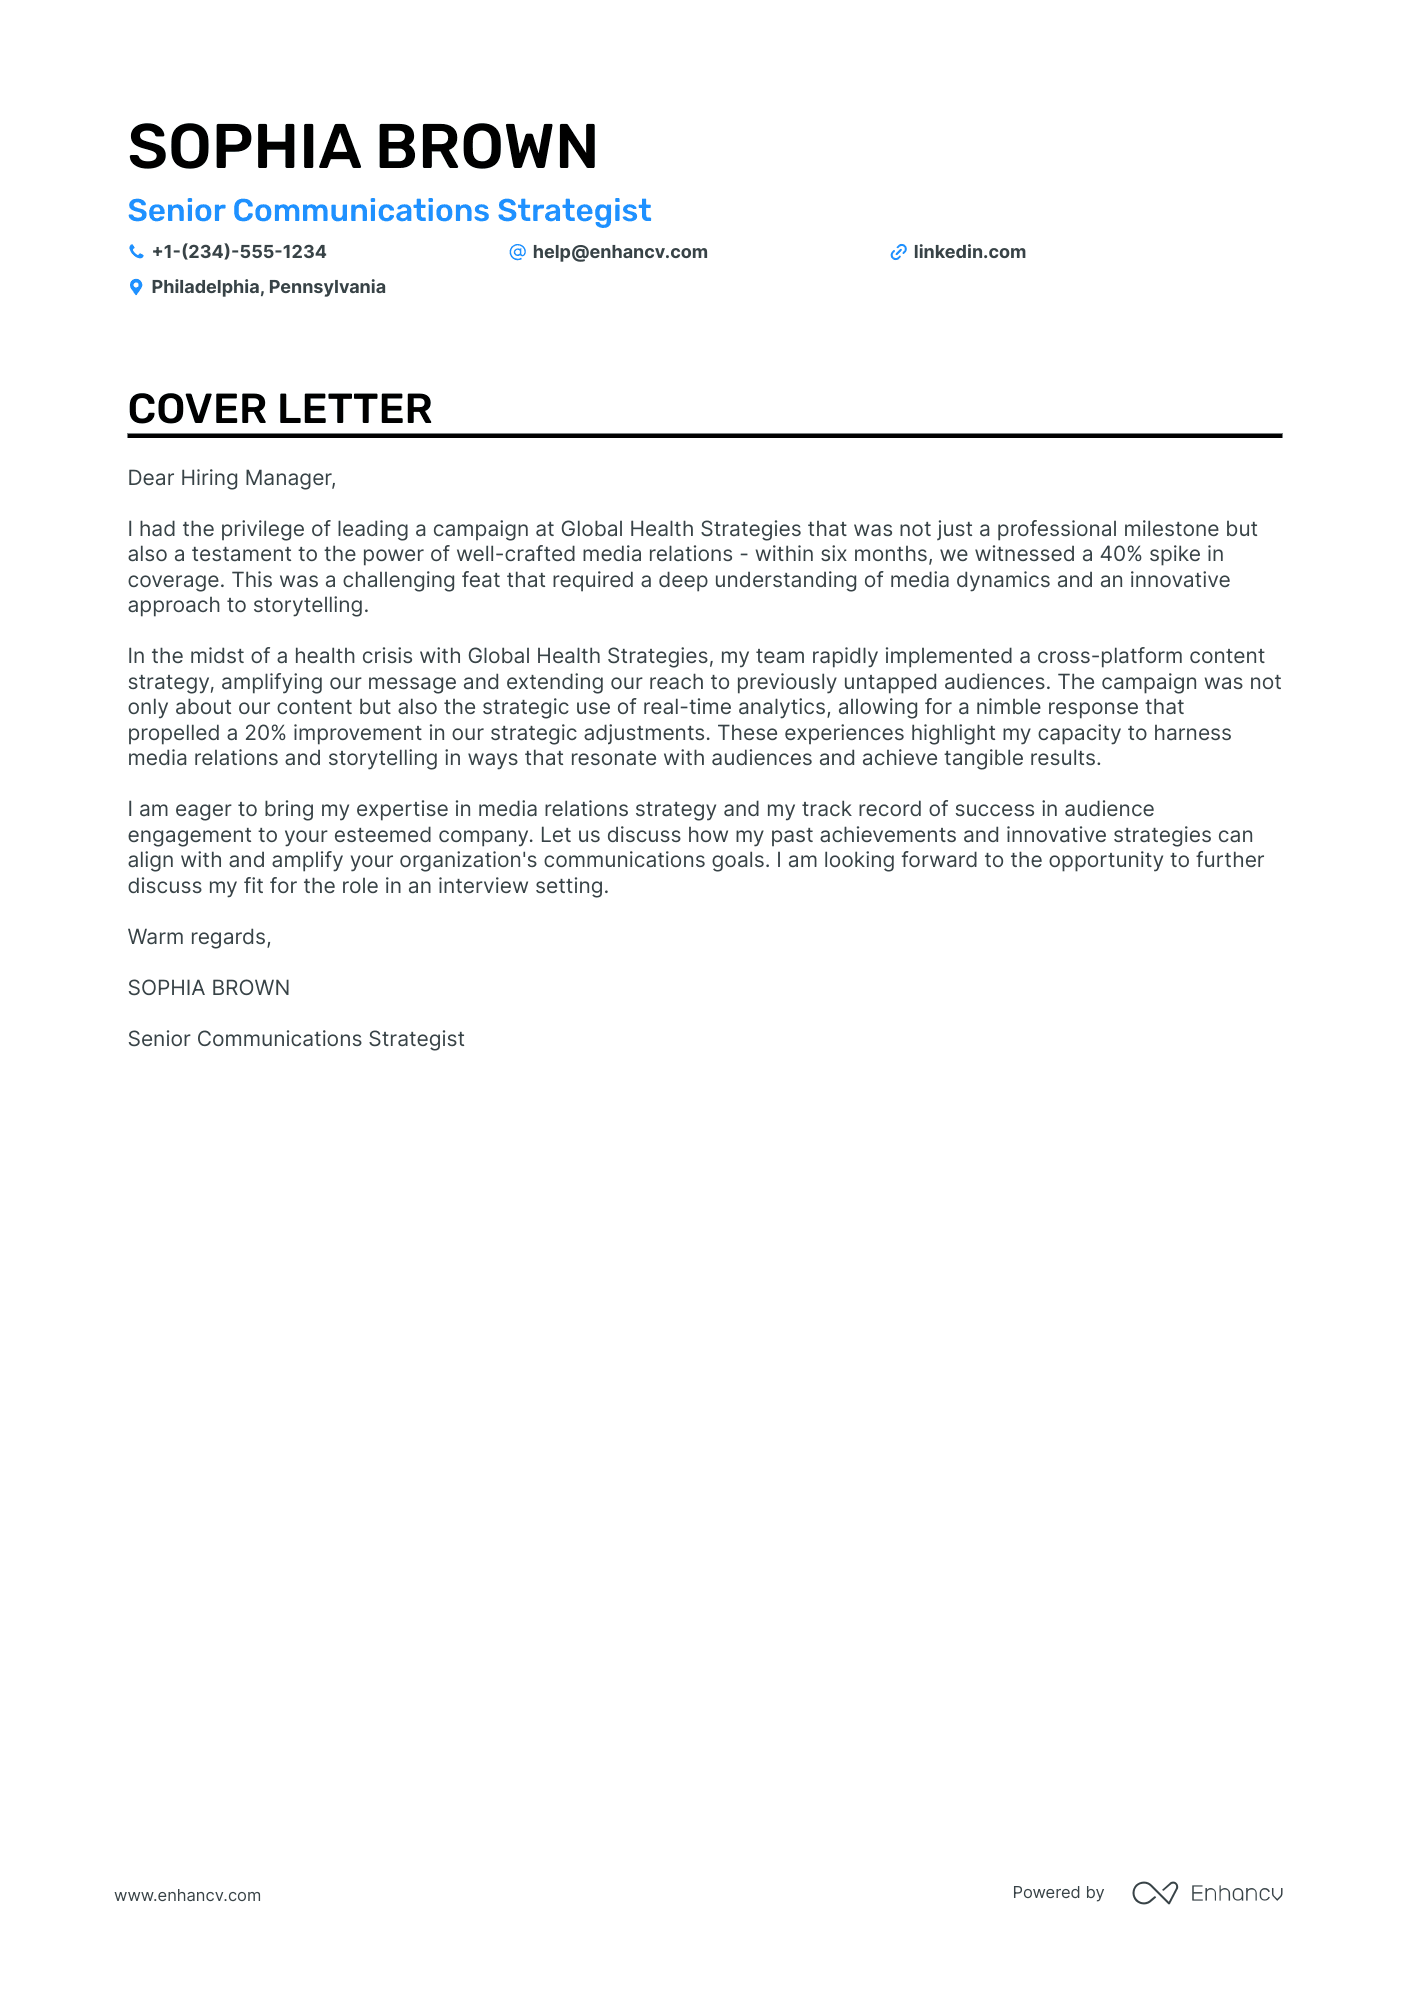 application letter as a journalist